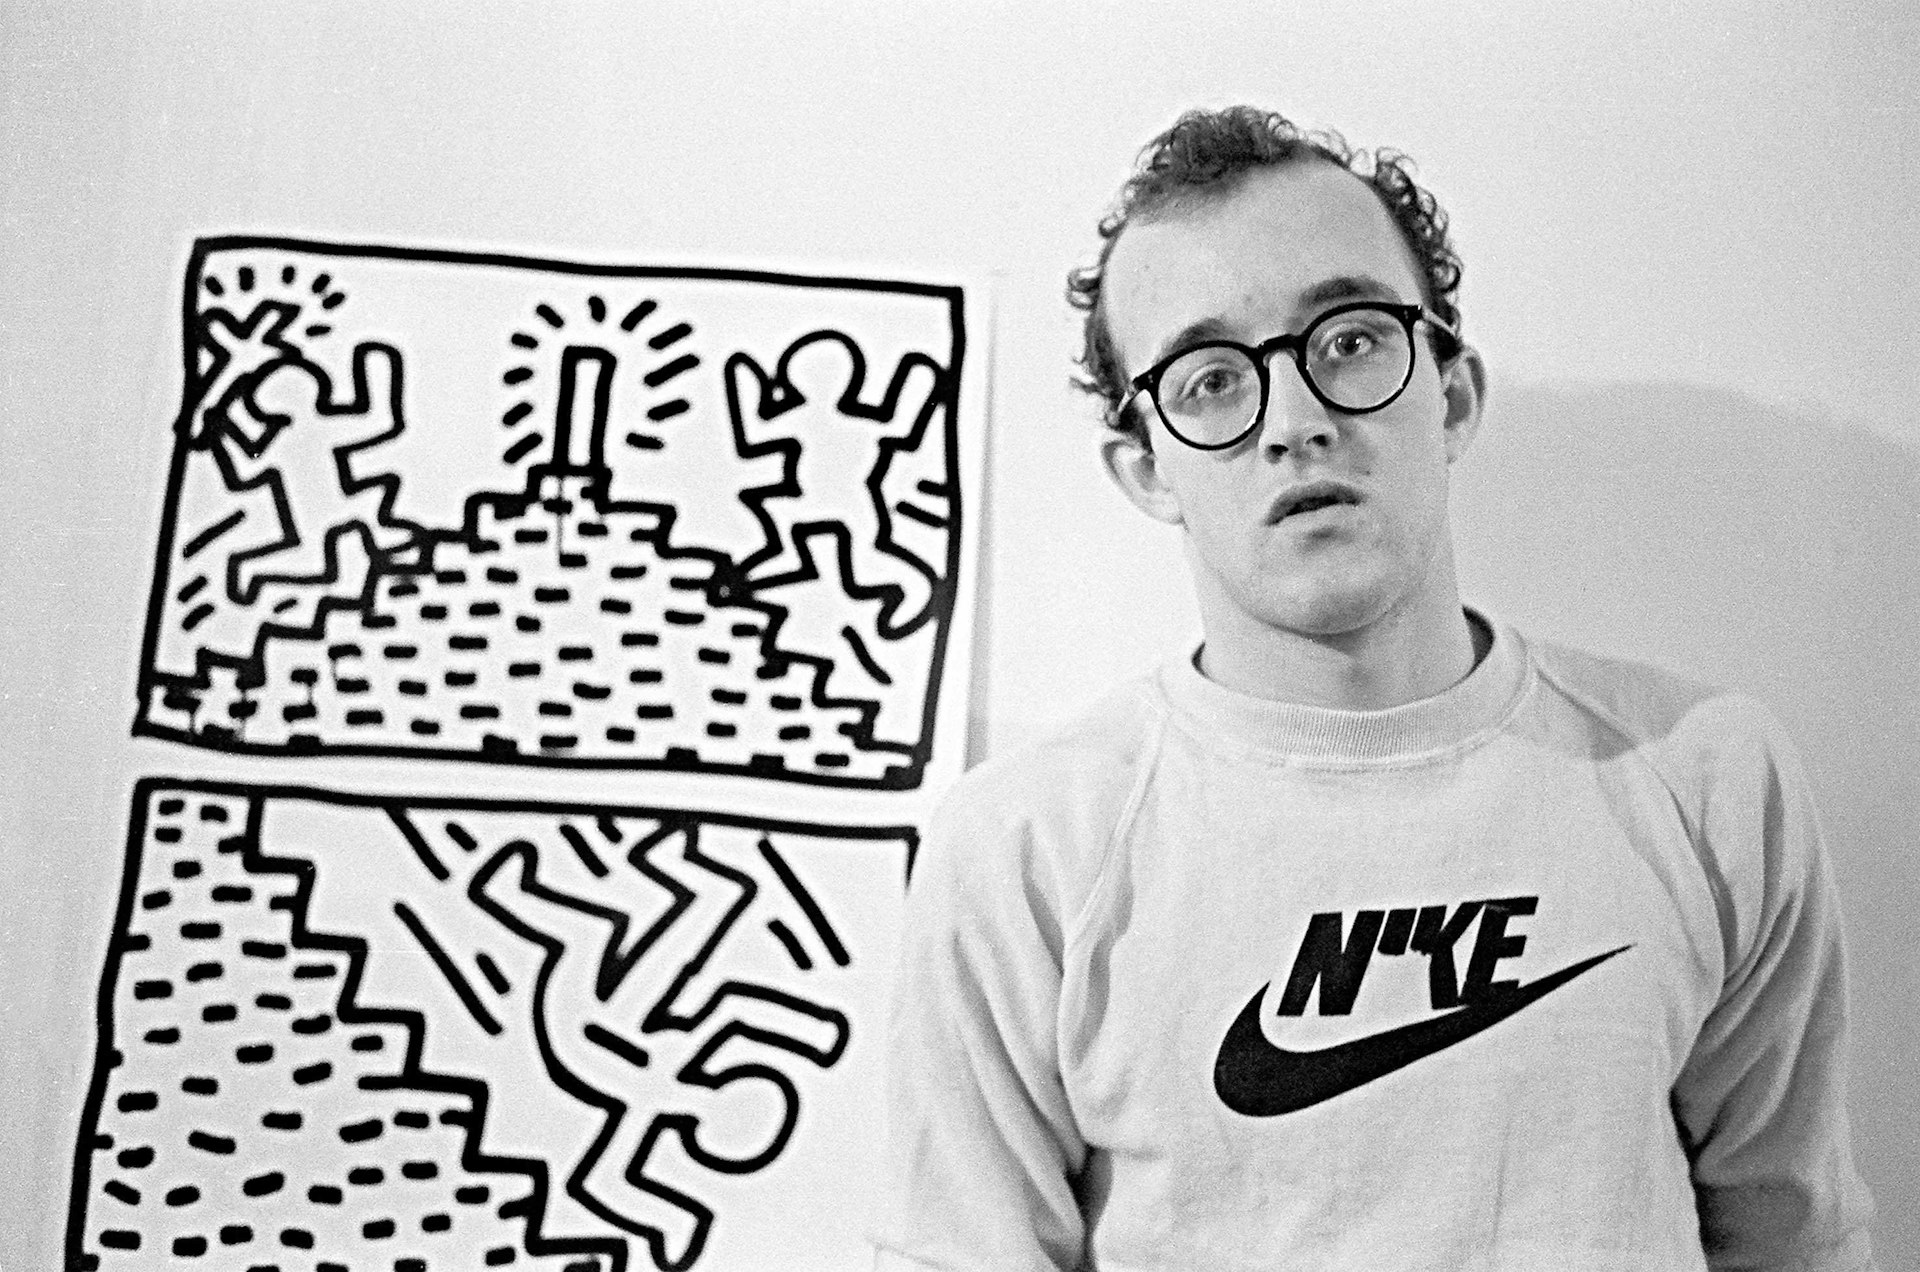 Remembering Keith Haring’s final years